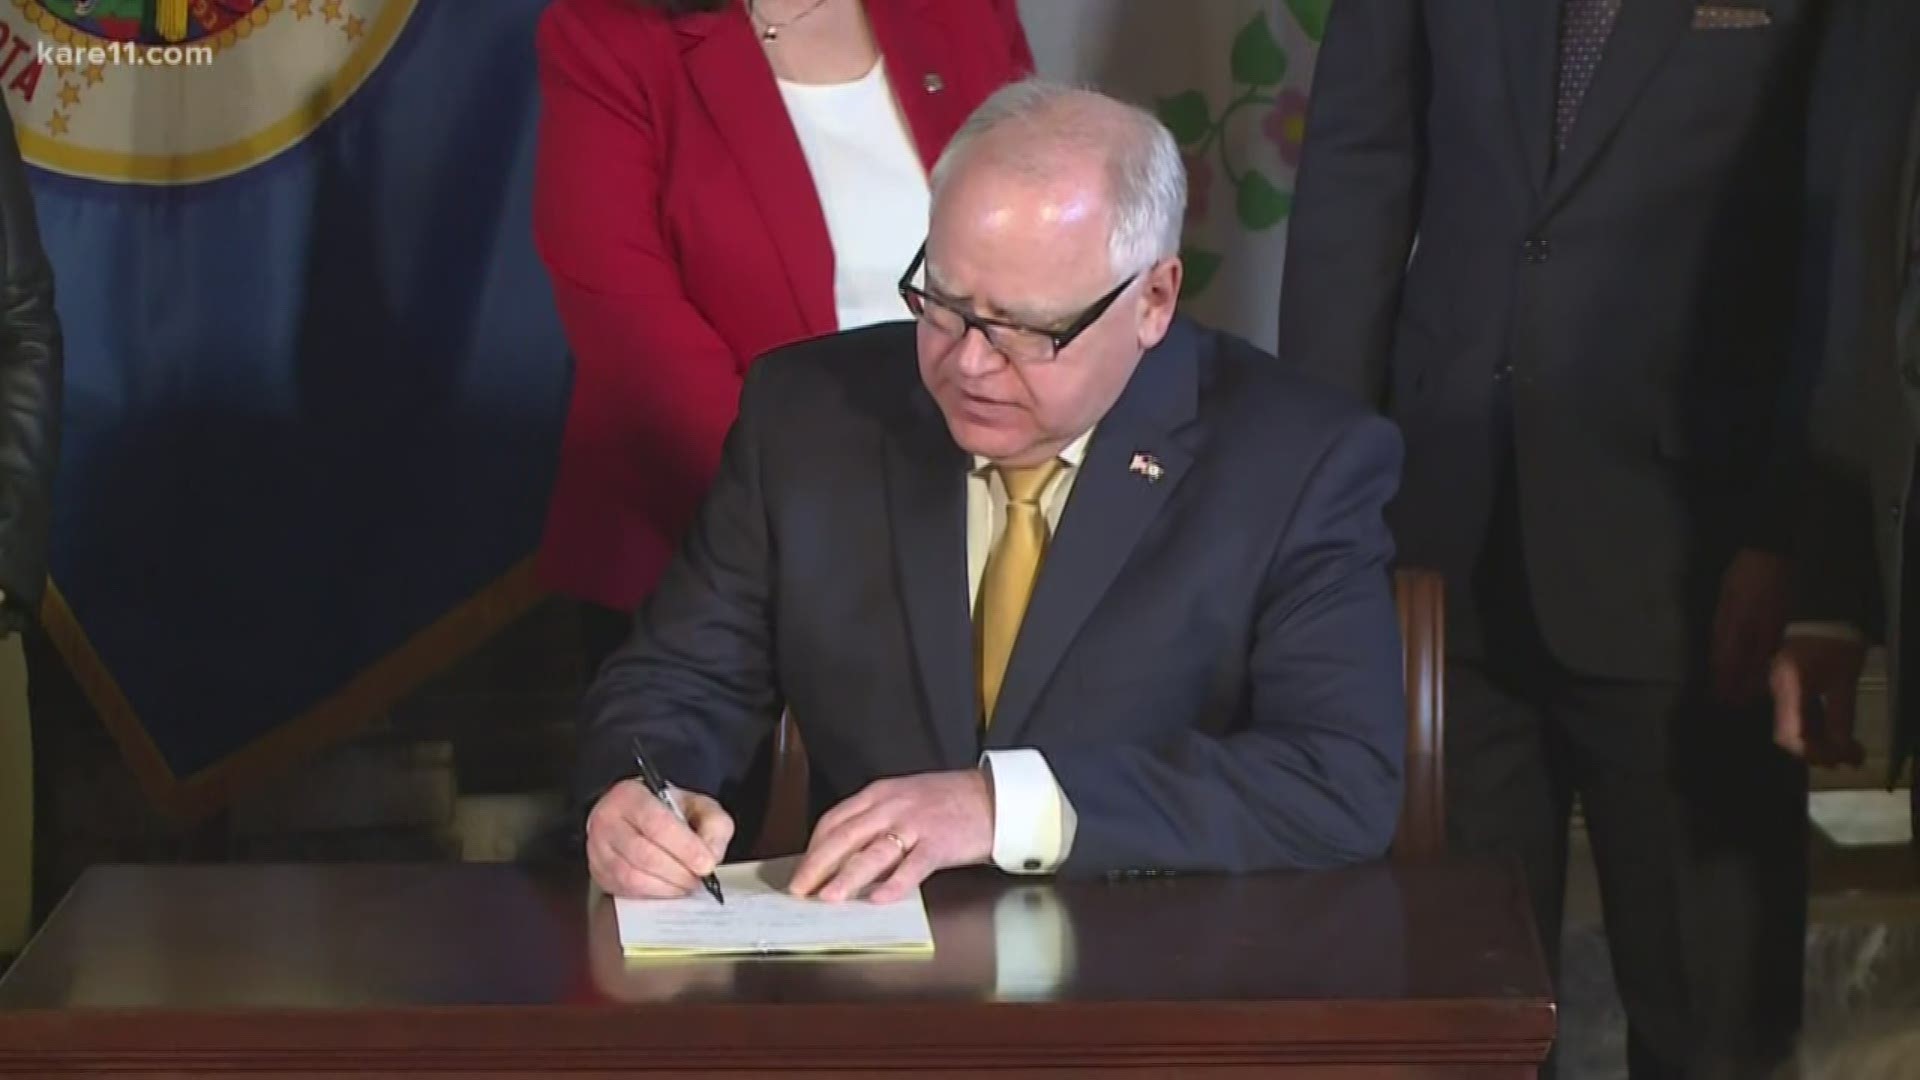 Governor Walz signed a bill setting aside $21 million for the coronavirus response. That's in addition to $4 million that was already shifted to the state's effort.